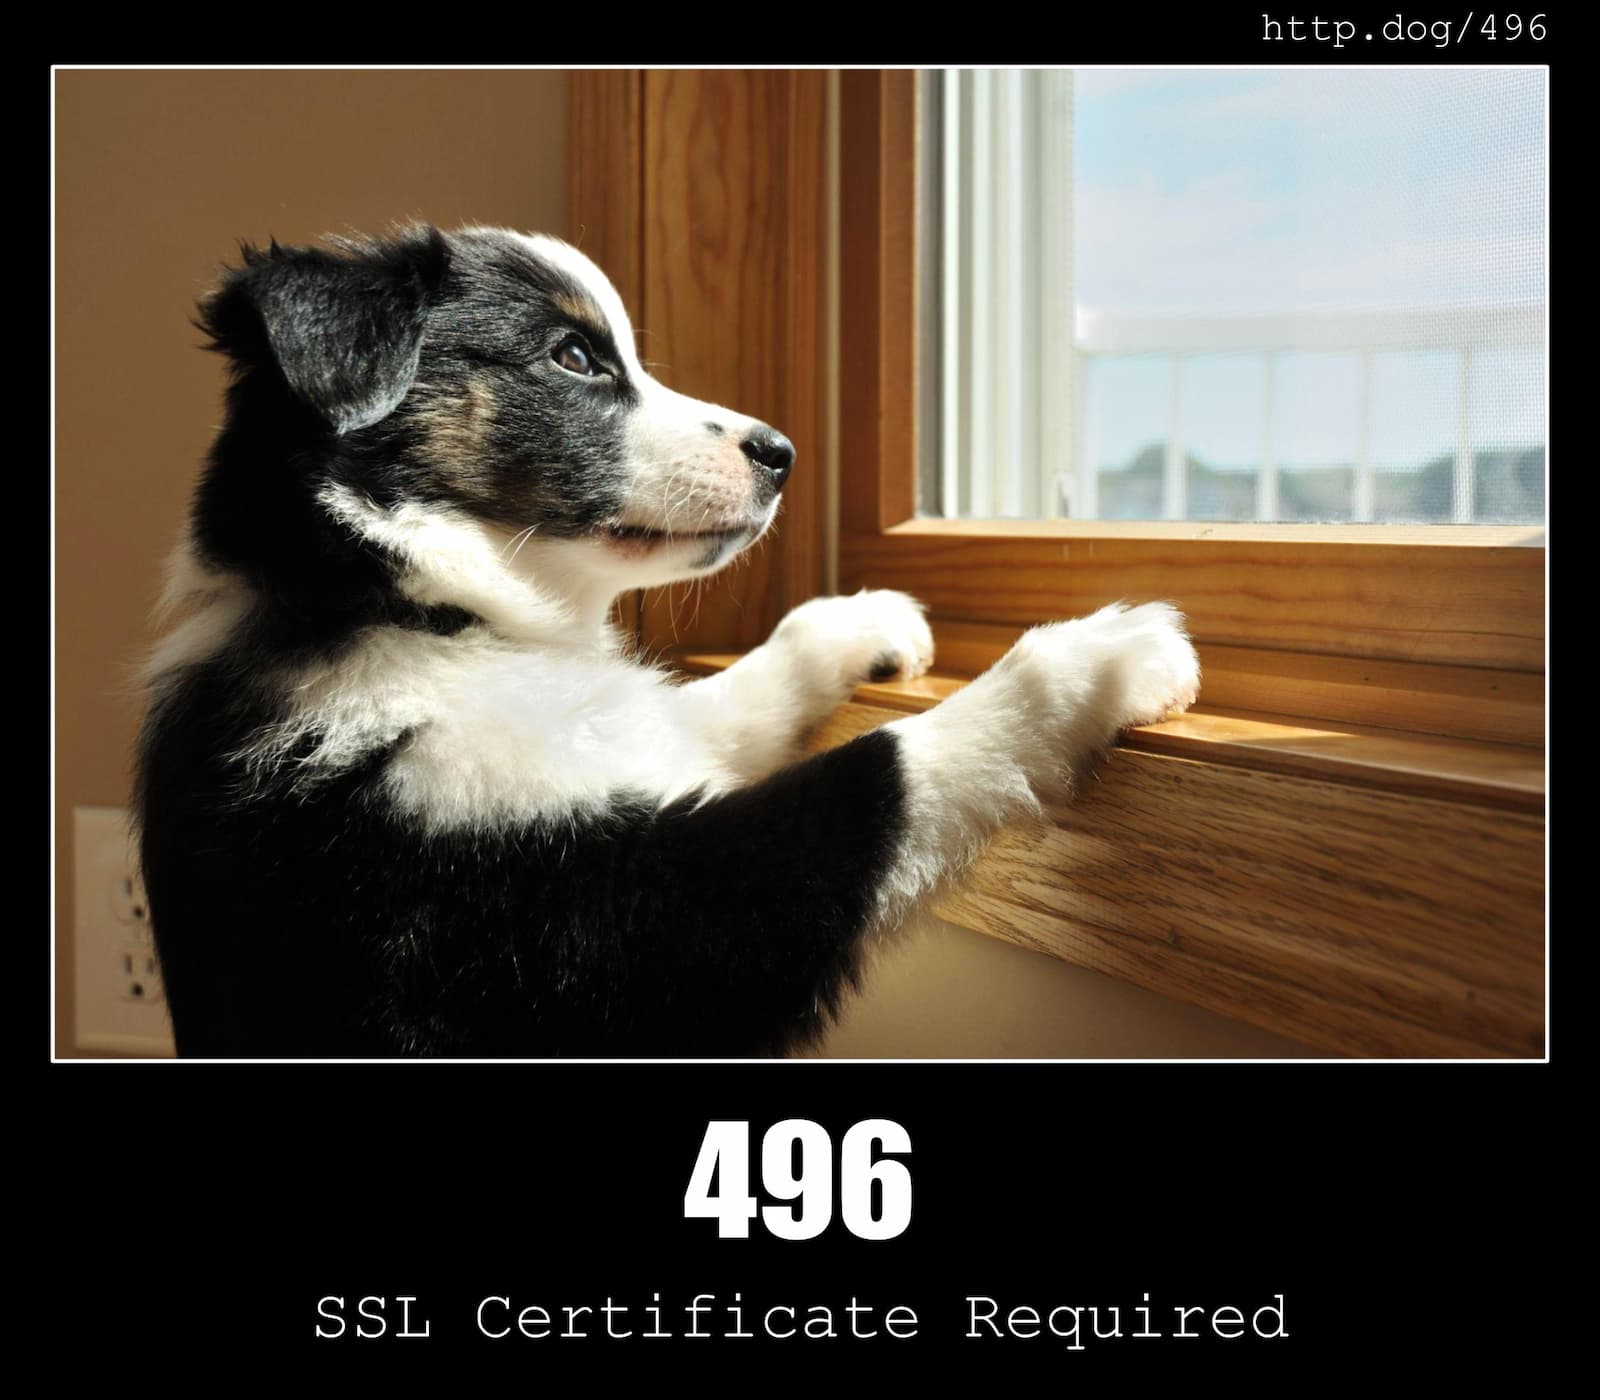 HTTP Status Code 496 SSL Certificate Required & Dogs